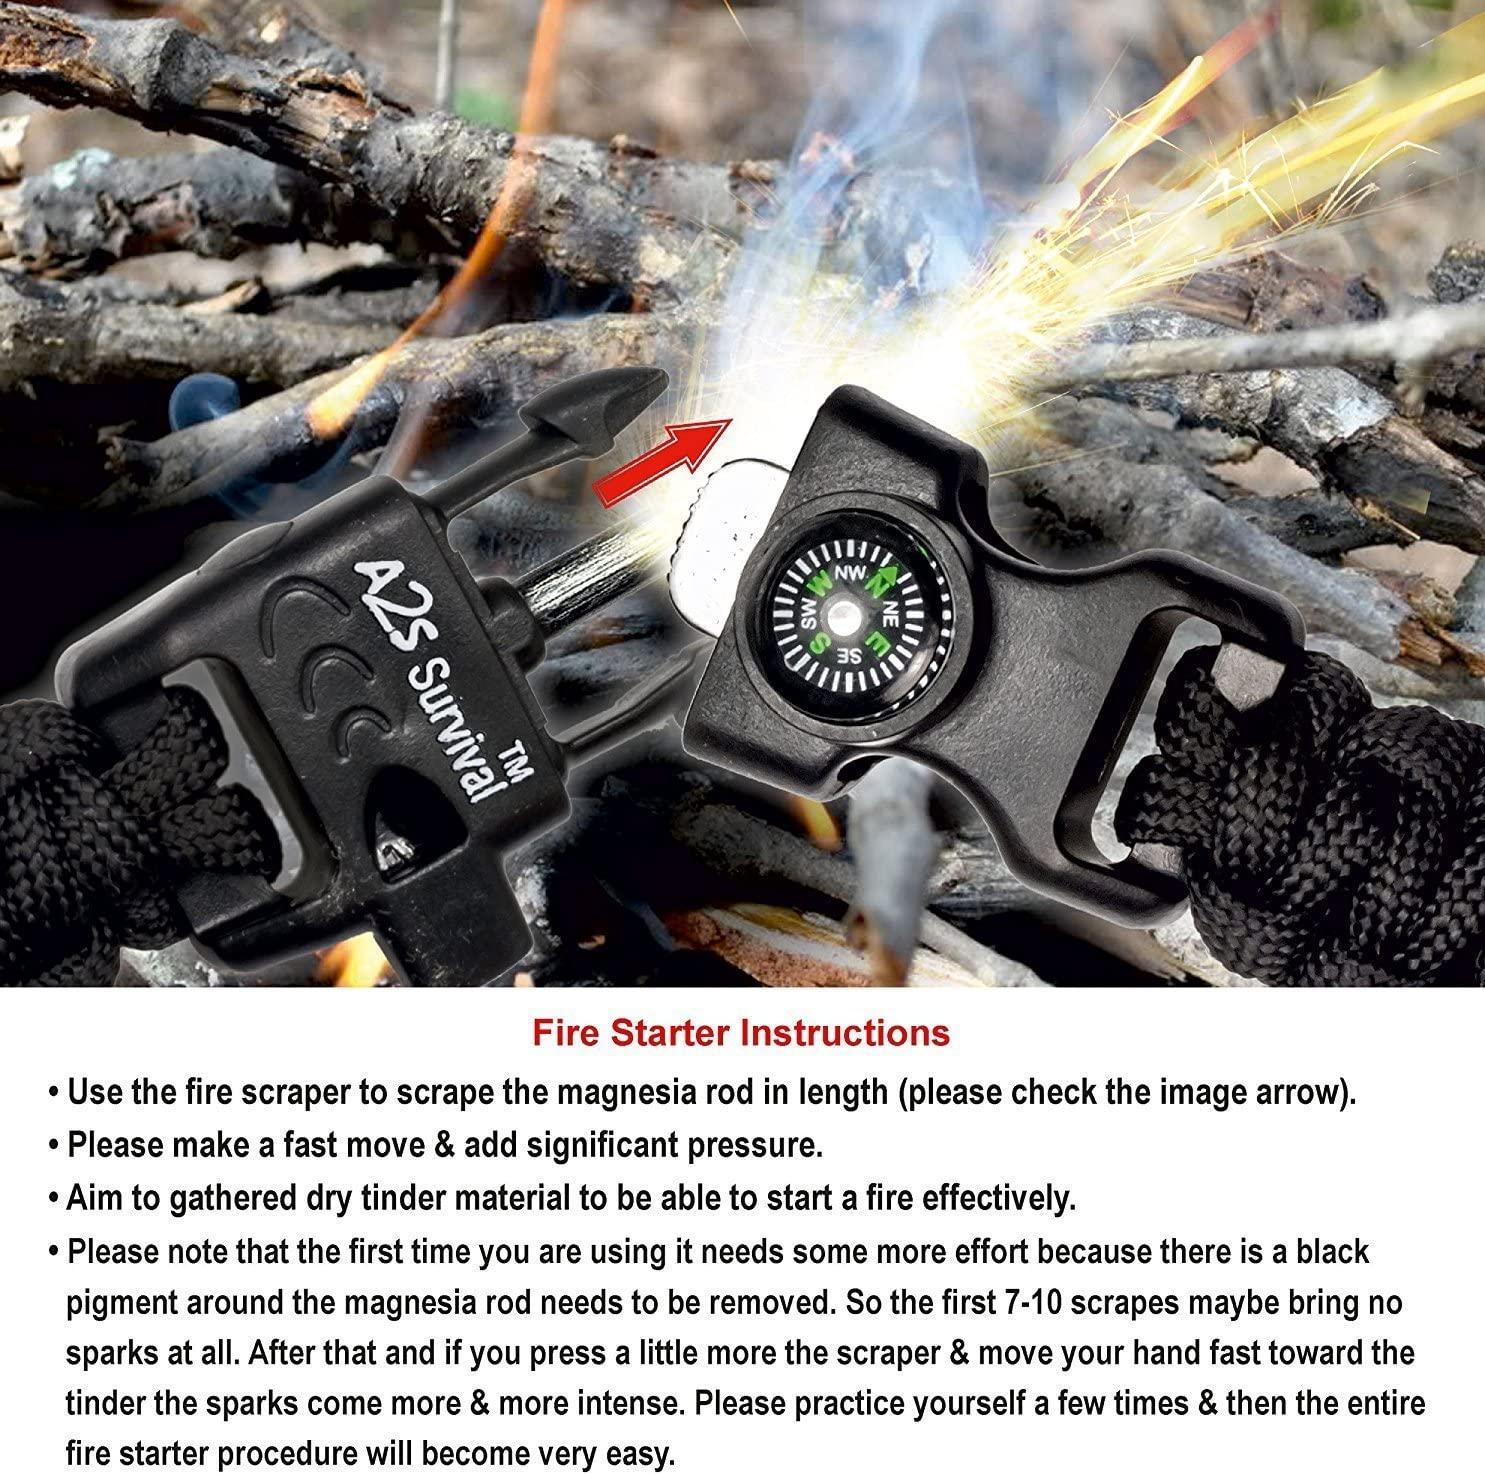 Wrist Wrapper: Wazoo Survival Gear Proves That It's All in the Wrist -  American Outdoor Guide